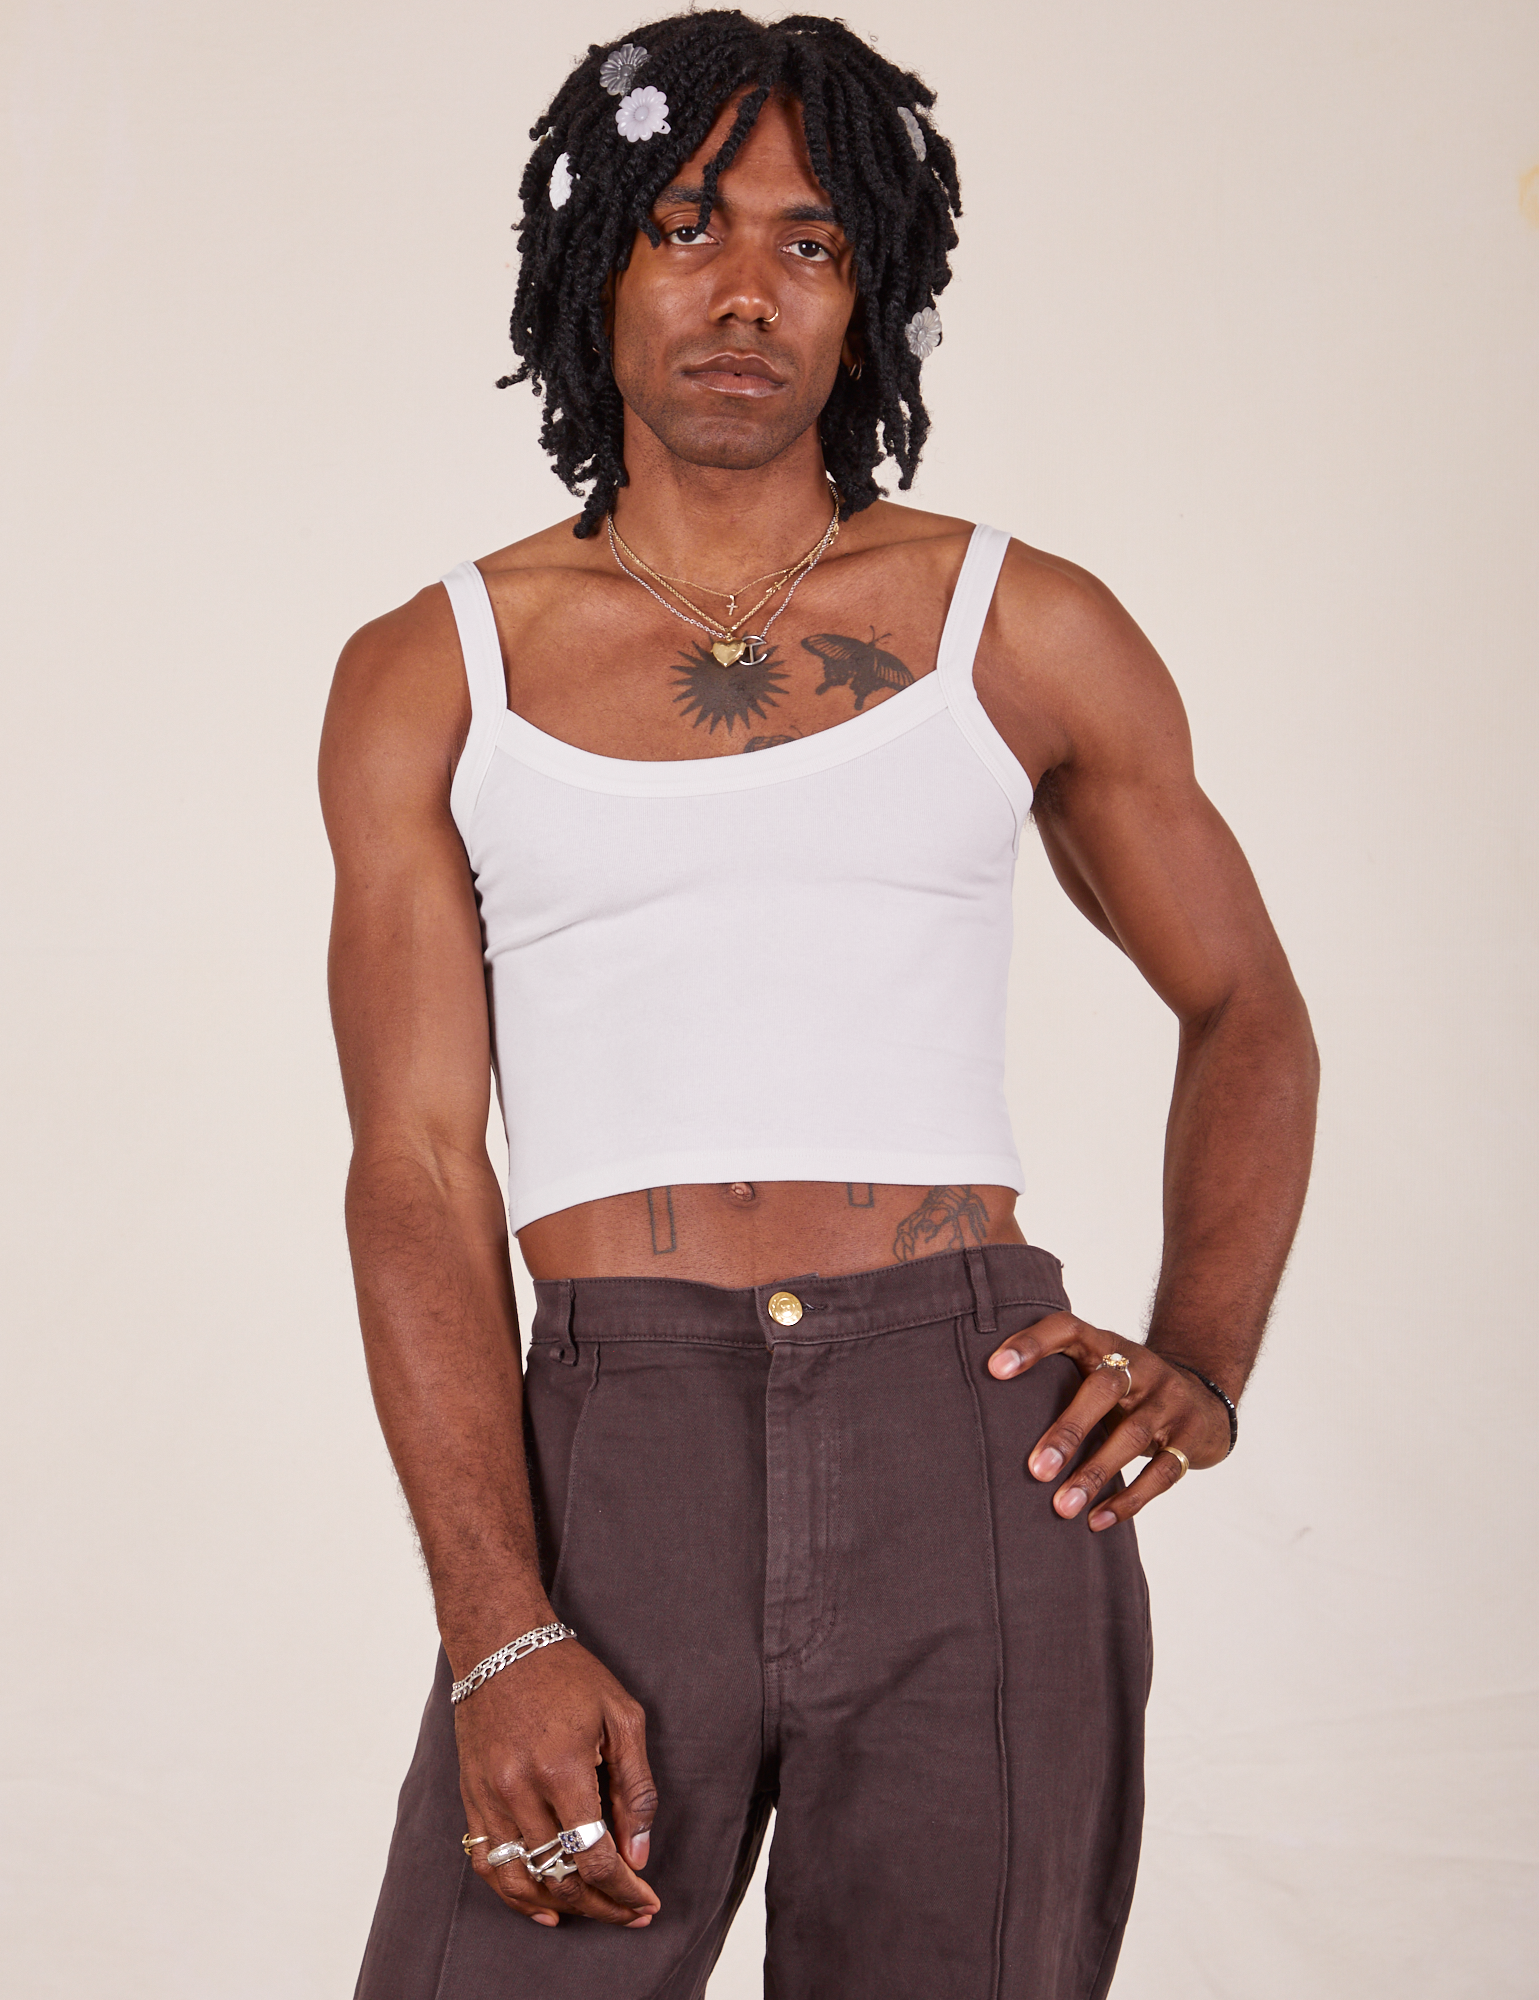 Jerrod is 6&#39;3&quot; and wearing S Cropped Cami in Vintage Tee Off-White paired with espresso brown Western Pants